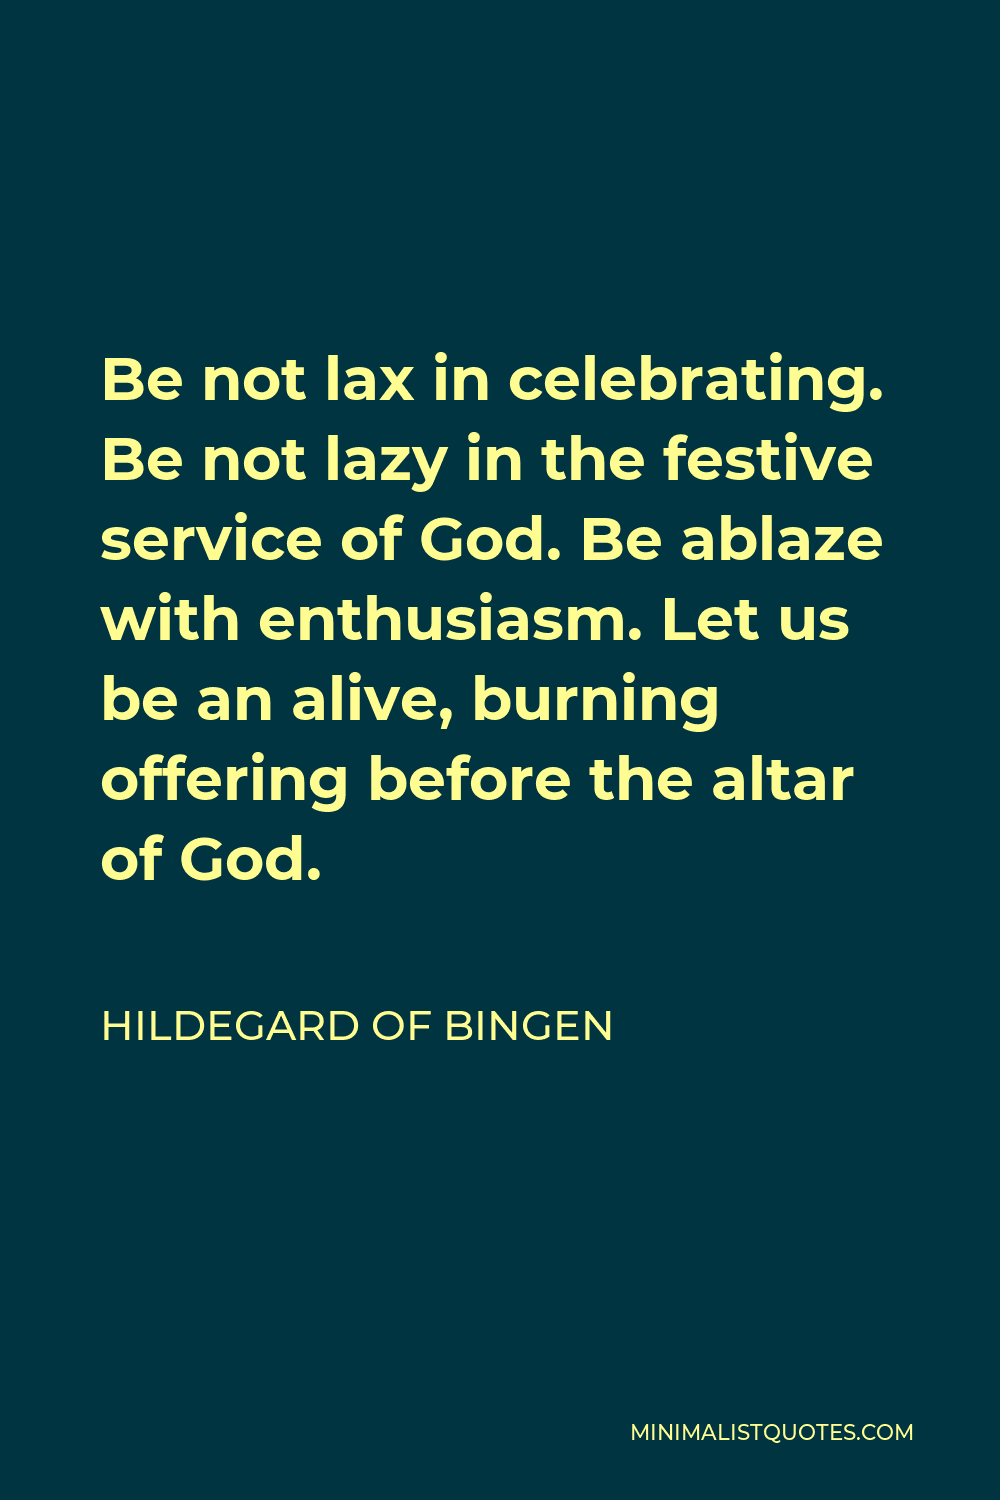 Hildegard of Bingen Quote - Be not lax in celebrating. Be not lazy in the festive service of God. Be ablaze with enthusiasm. Let us be an alive, burning offering before the altar of God.